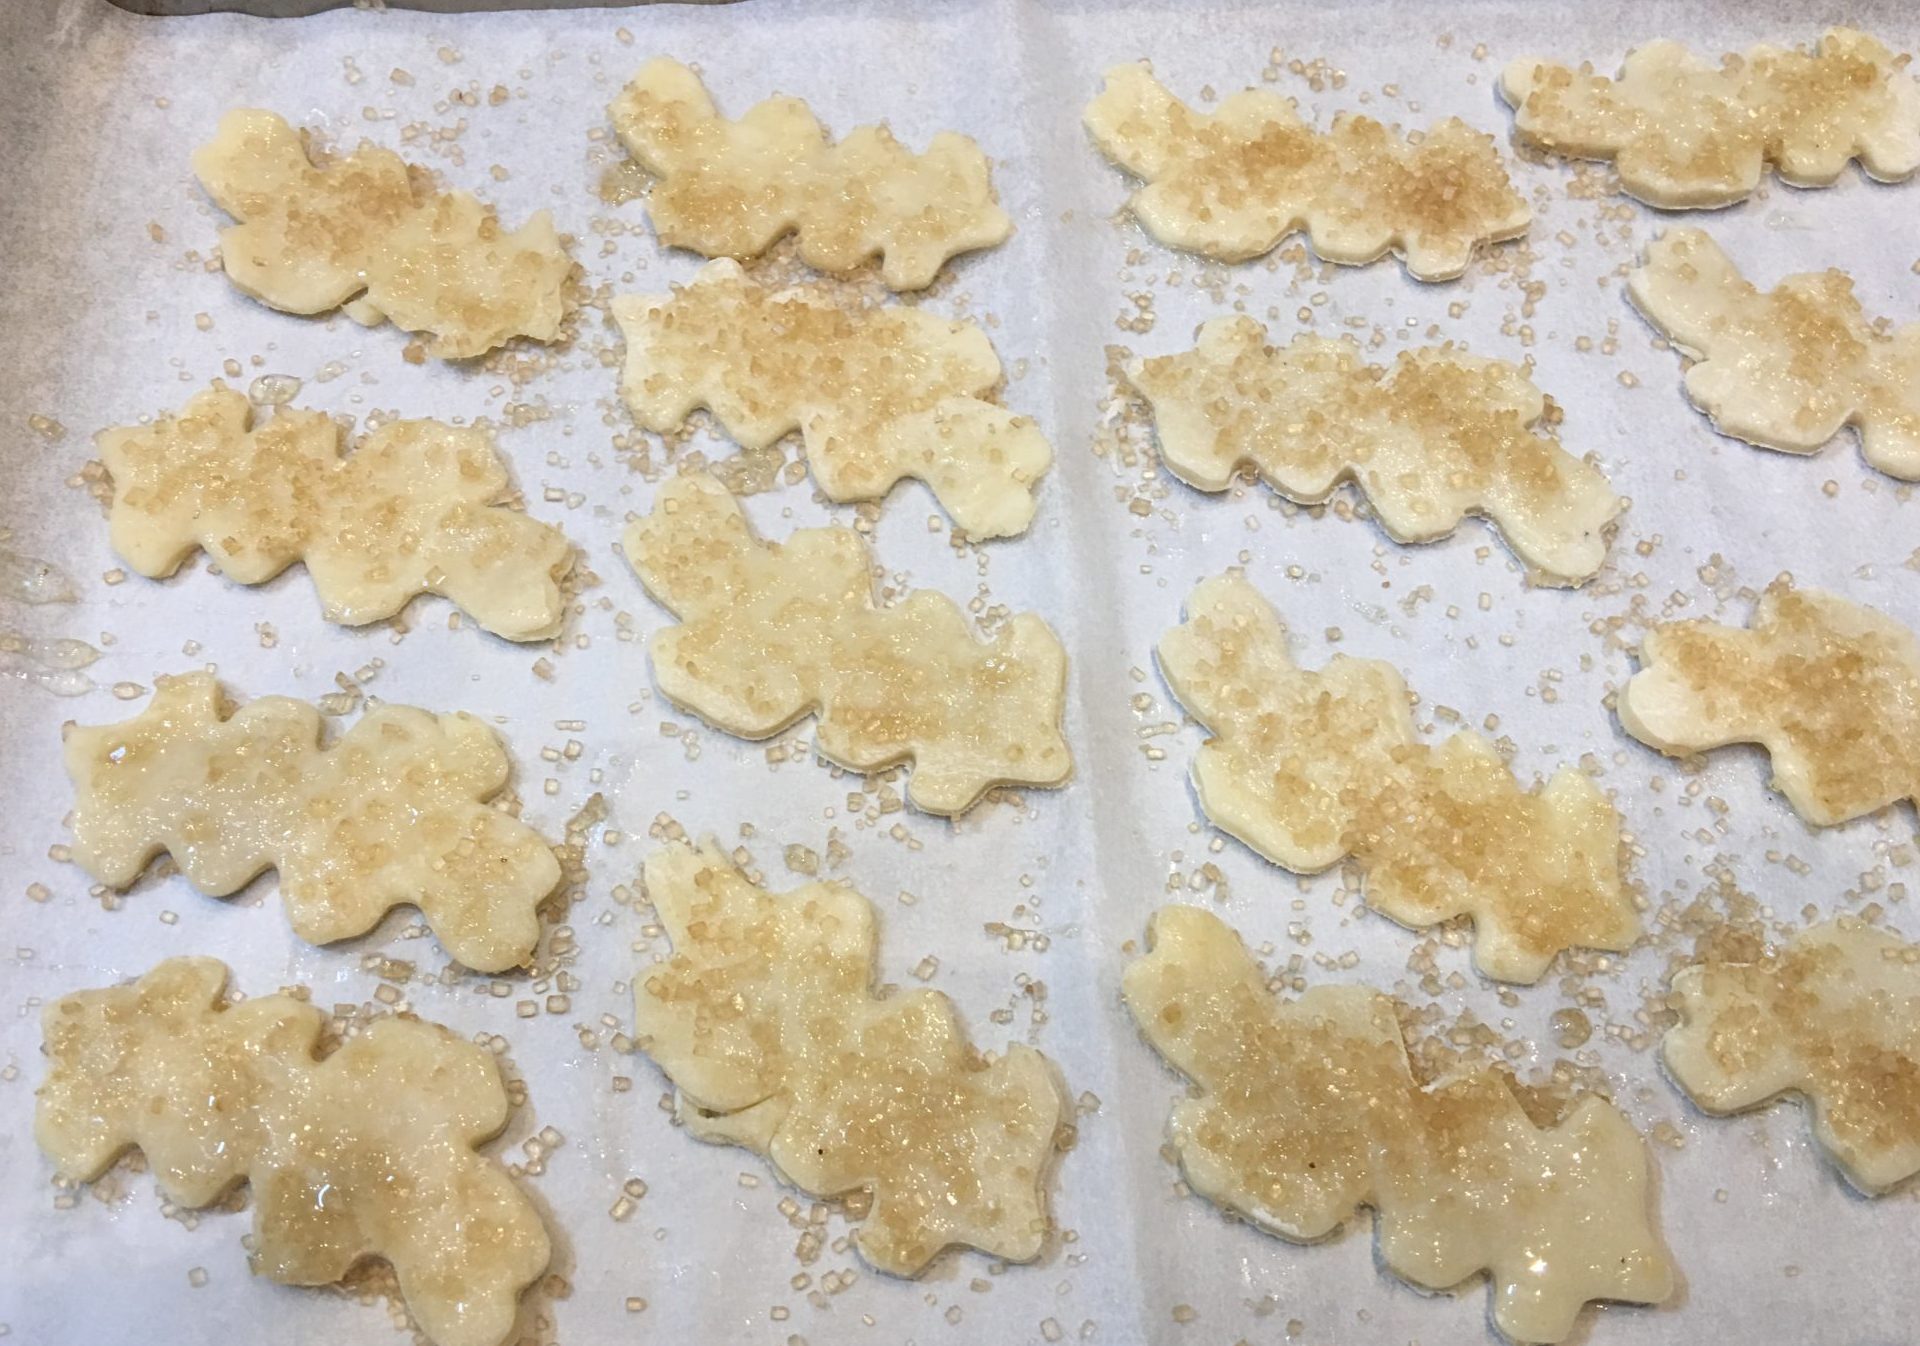 Leaves made of pastry and sprinkled with sugar